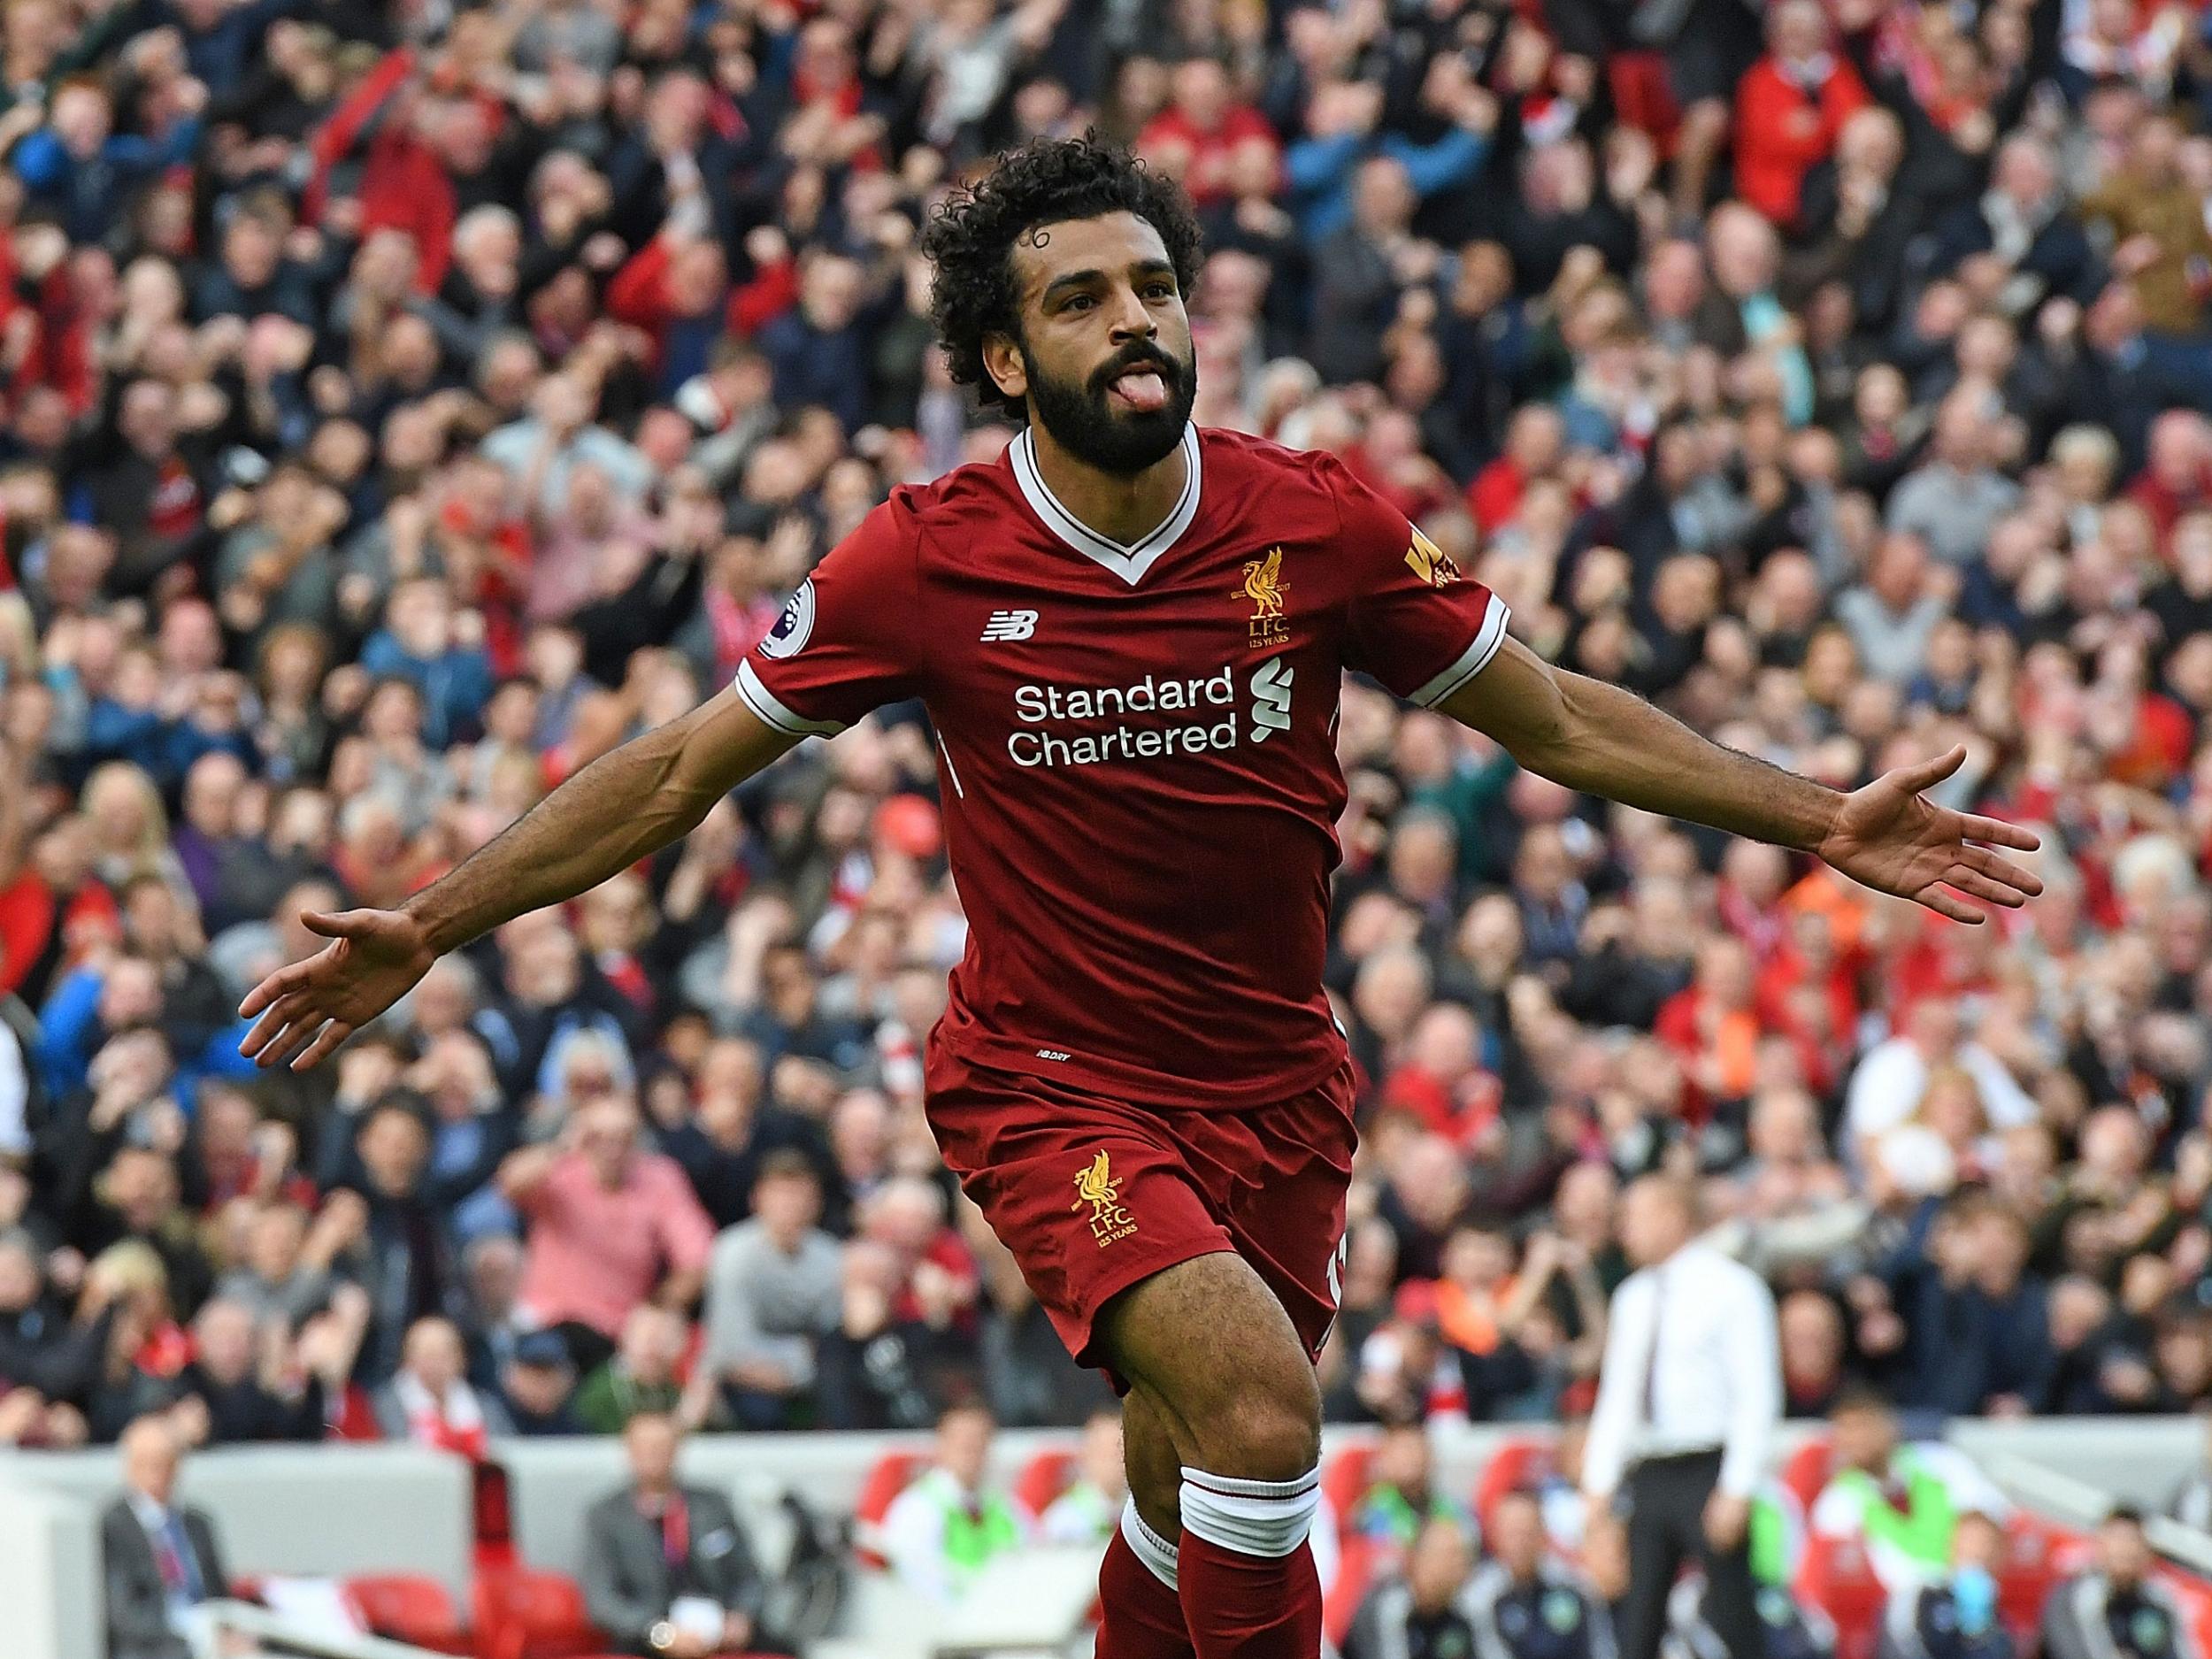 Mohamed Salah has made a bright and promising start to his Liverpool career